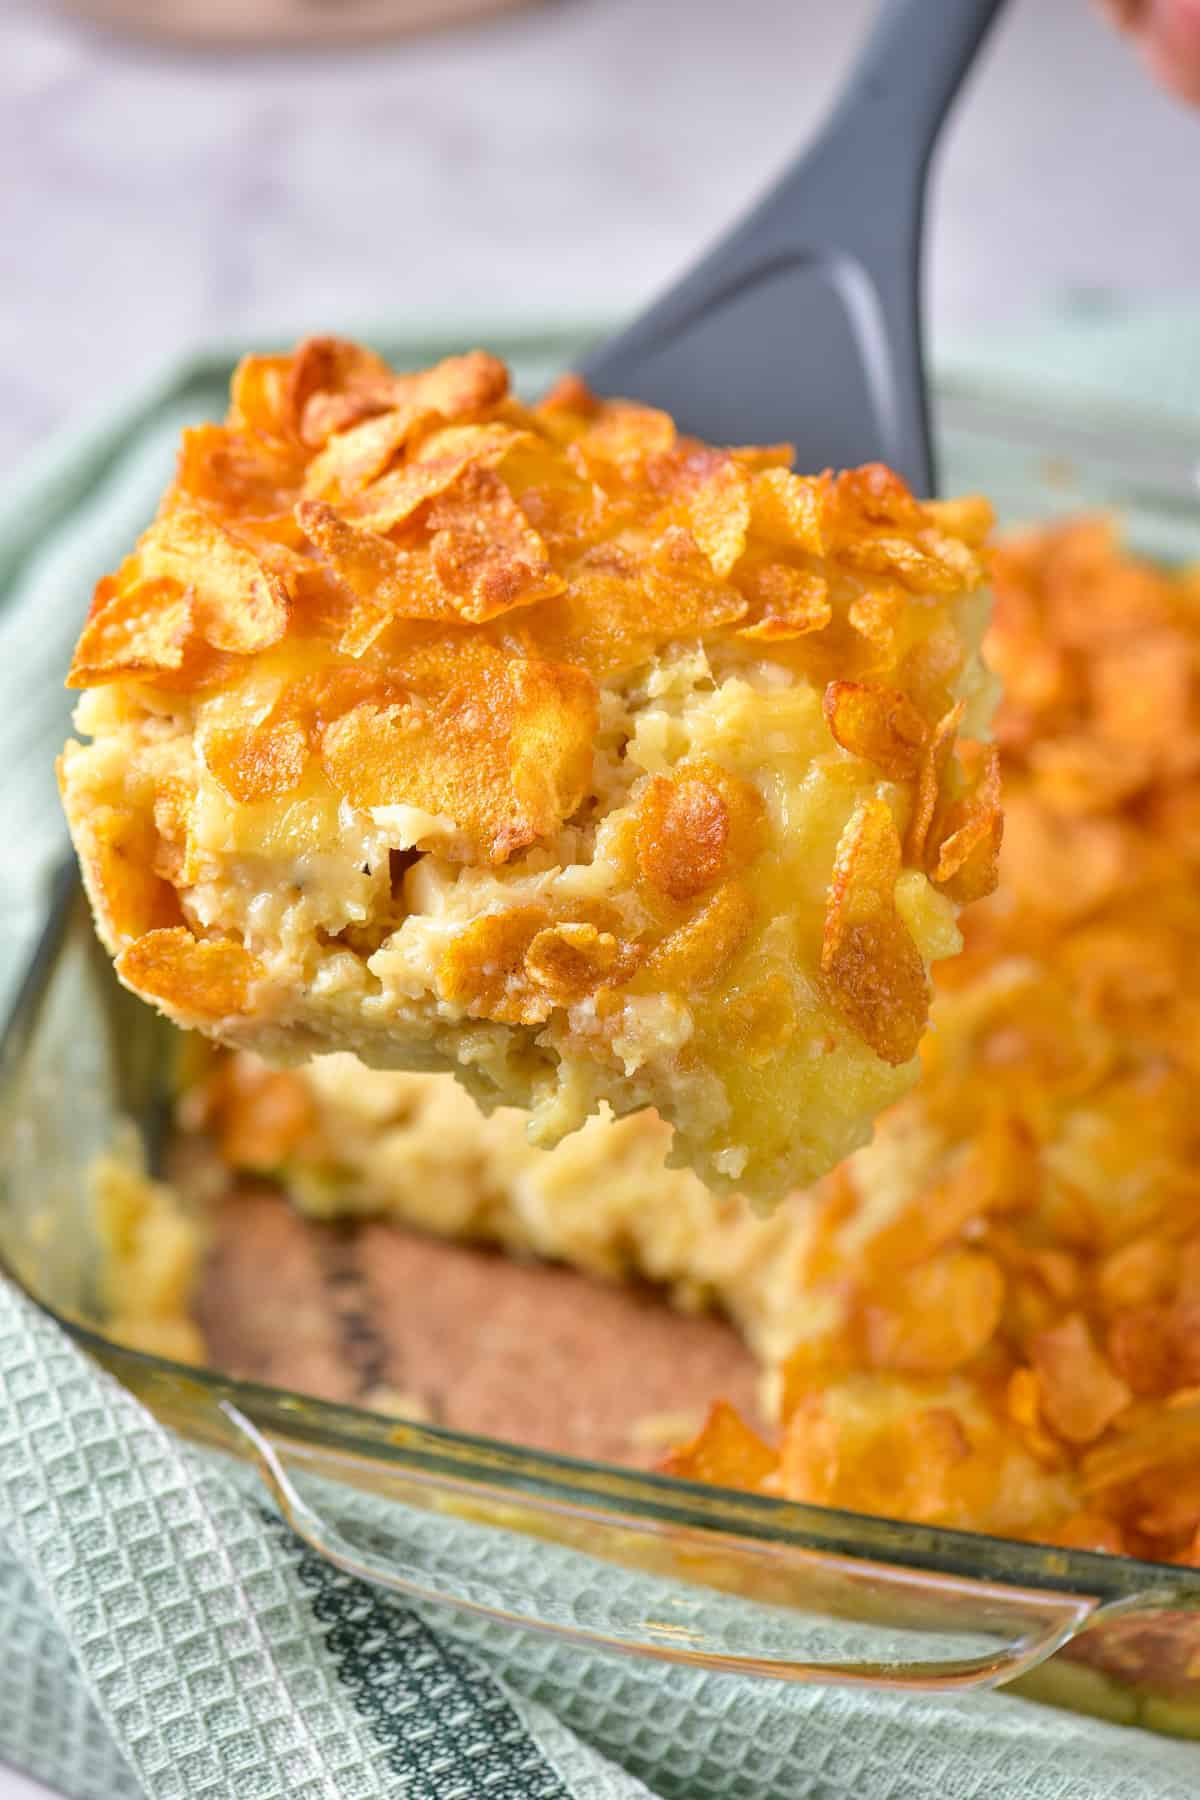 A slice of hashbrown breakfast casserole being lifted out of the baking dish.